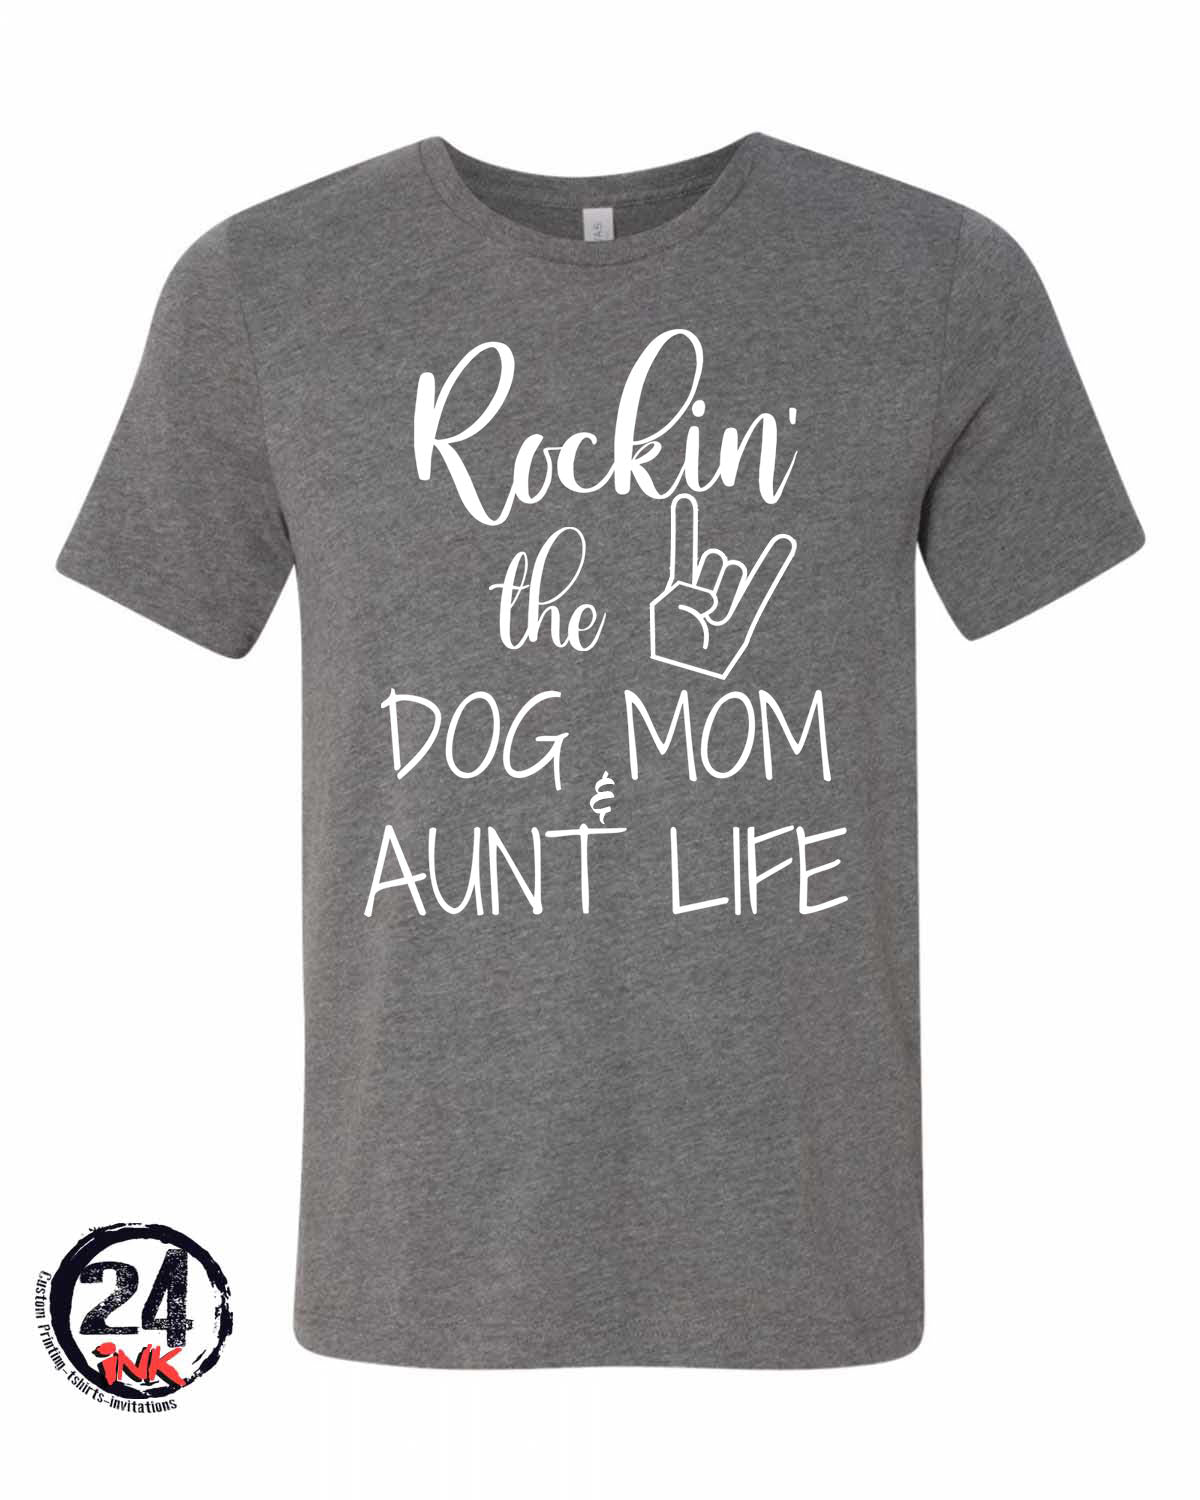 Rockin the dog mom and aunt life T-shirt